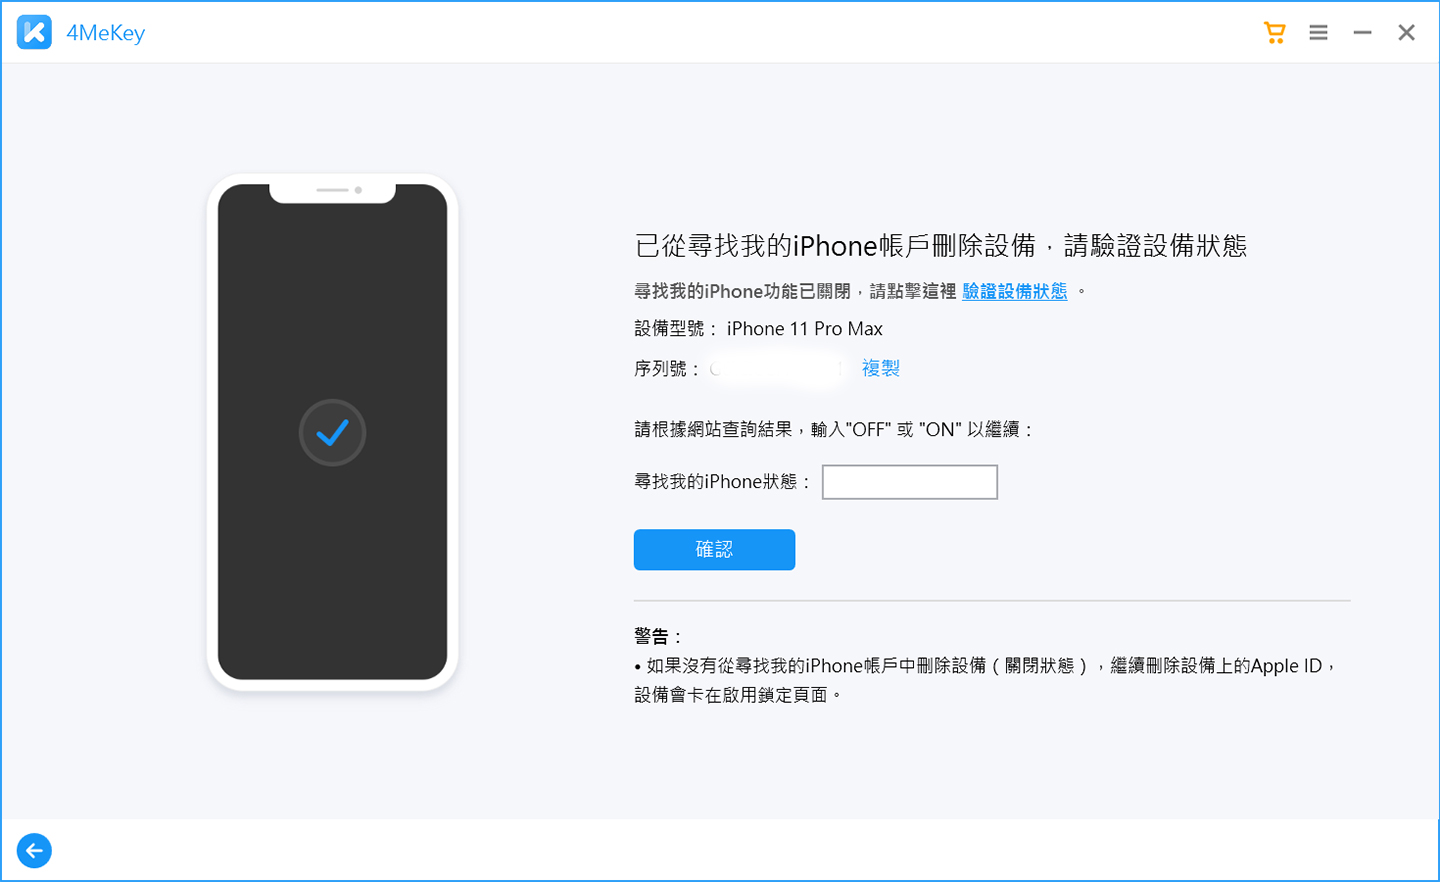 Next, 4MeKey will first complete the closing of the device search function of the iPhone account. At this time, we need to verify the device status. We need to click the 